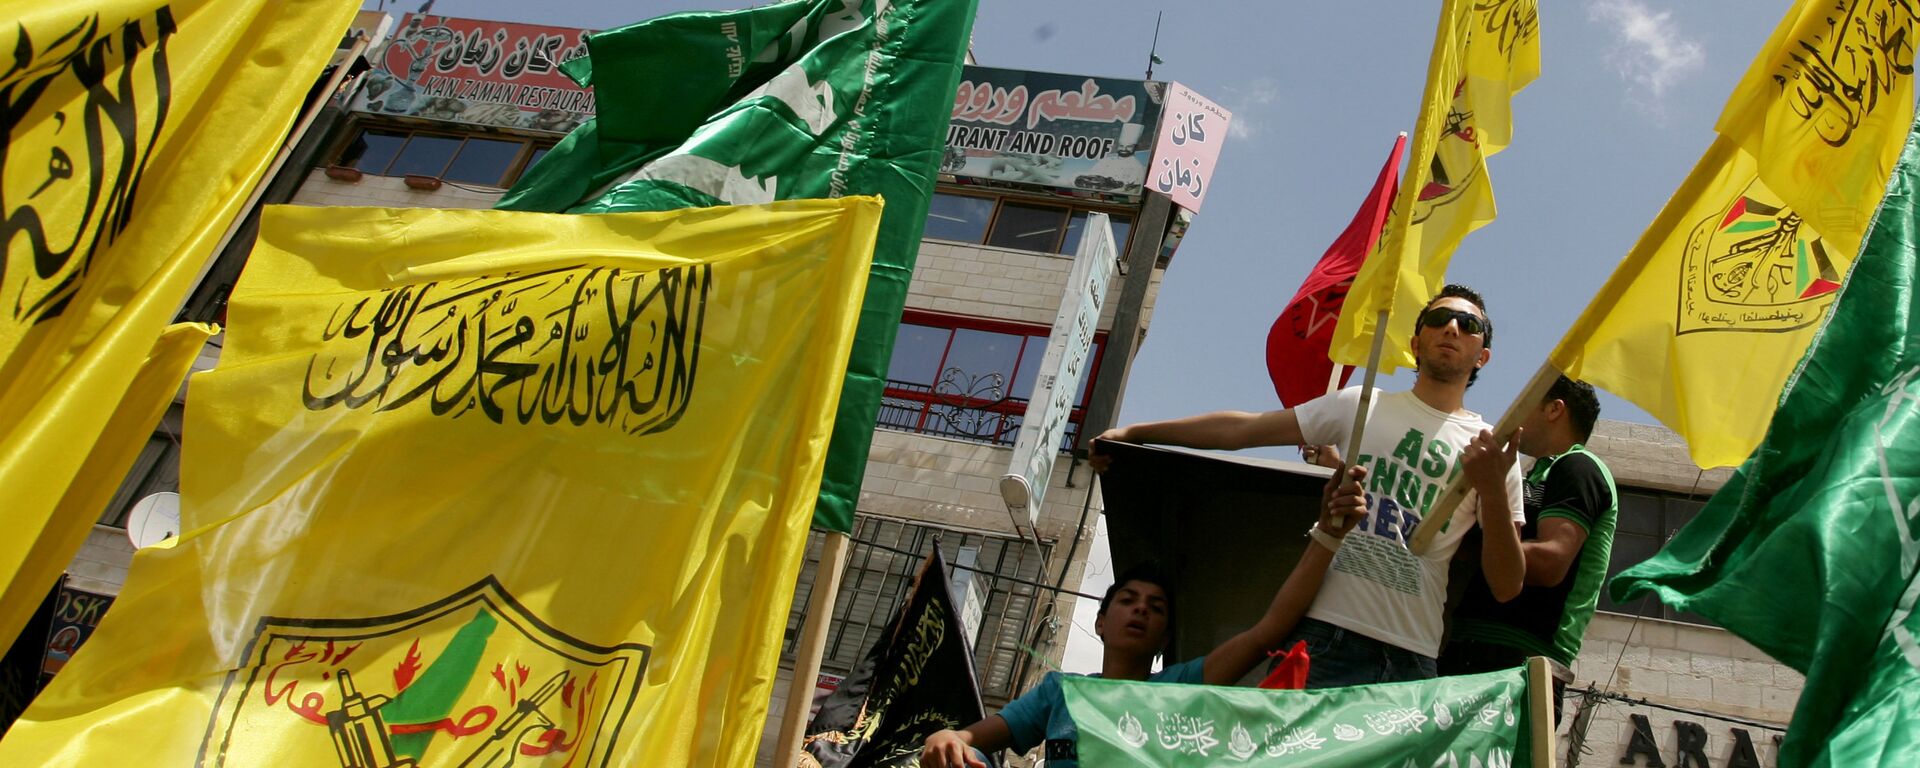 Palestinian supporters of Hamas Islamist movement and of Fatah party wave their faction's flags during a rally to support the Palestinian political unity deal, in the West Bank city of Jenin. (File) - Sputnik International, 1920, 09.05.2022